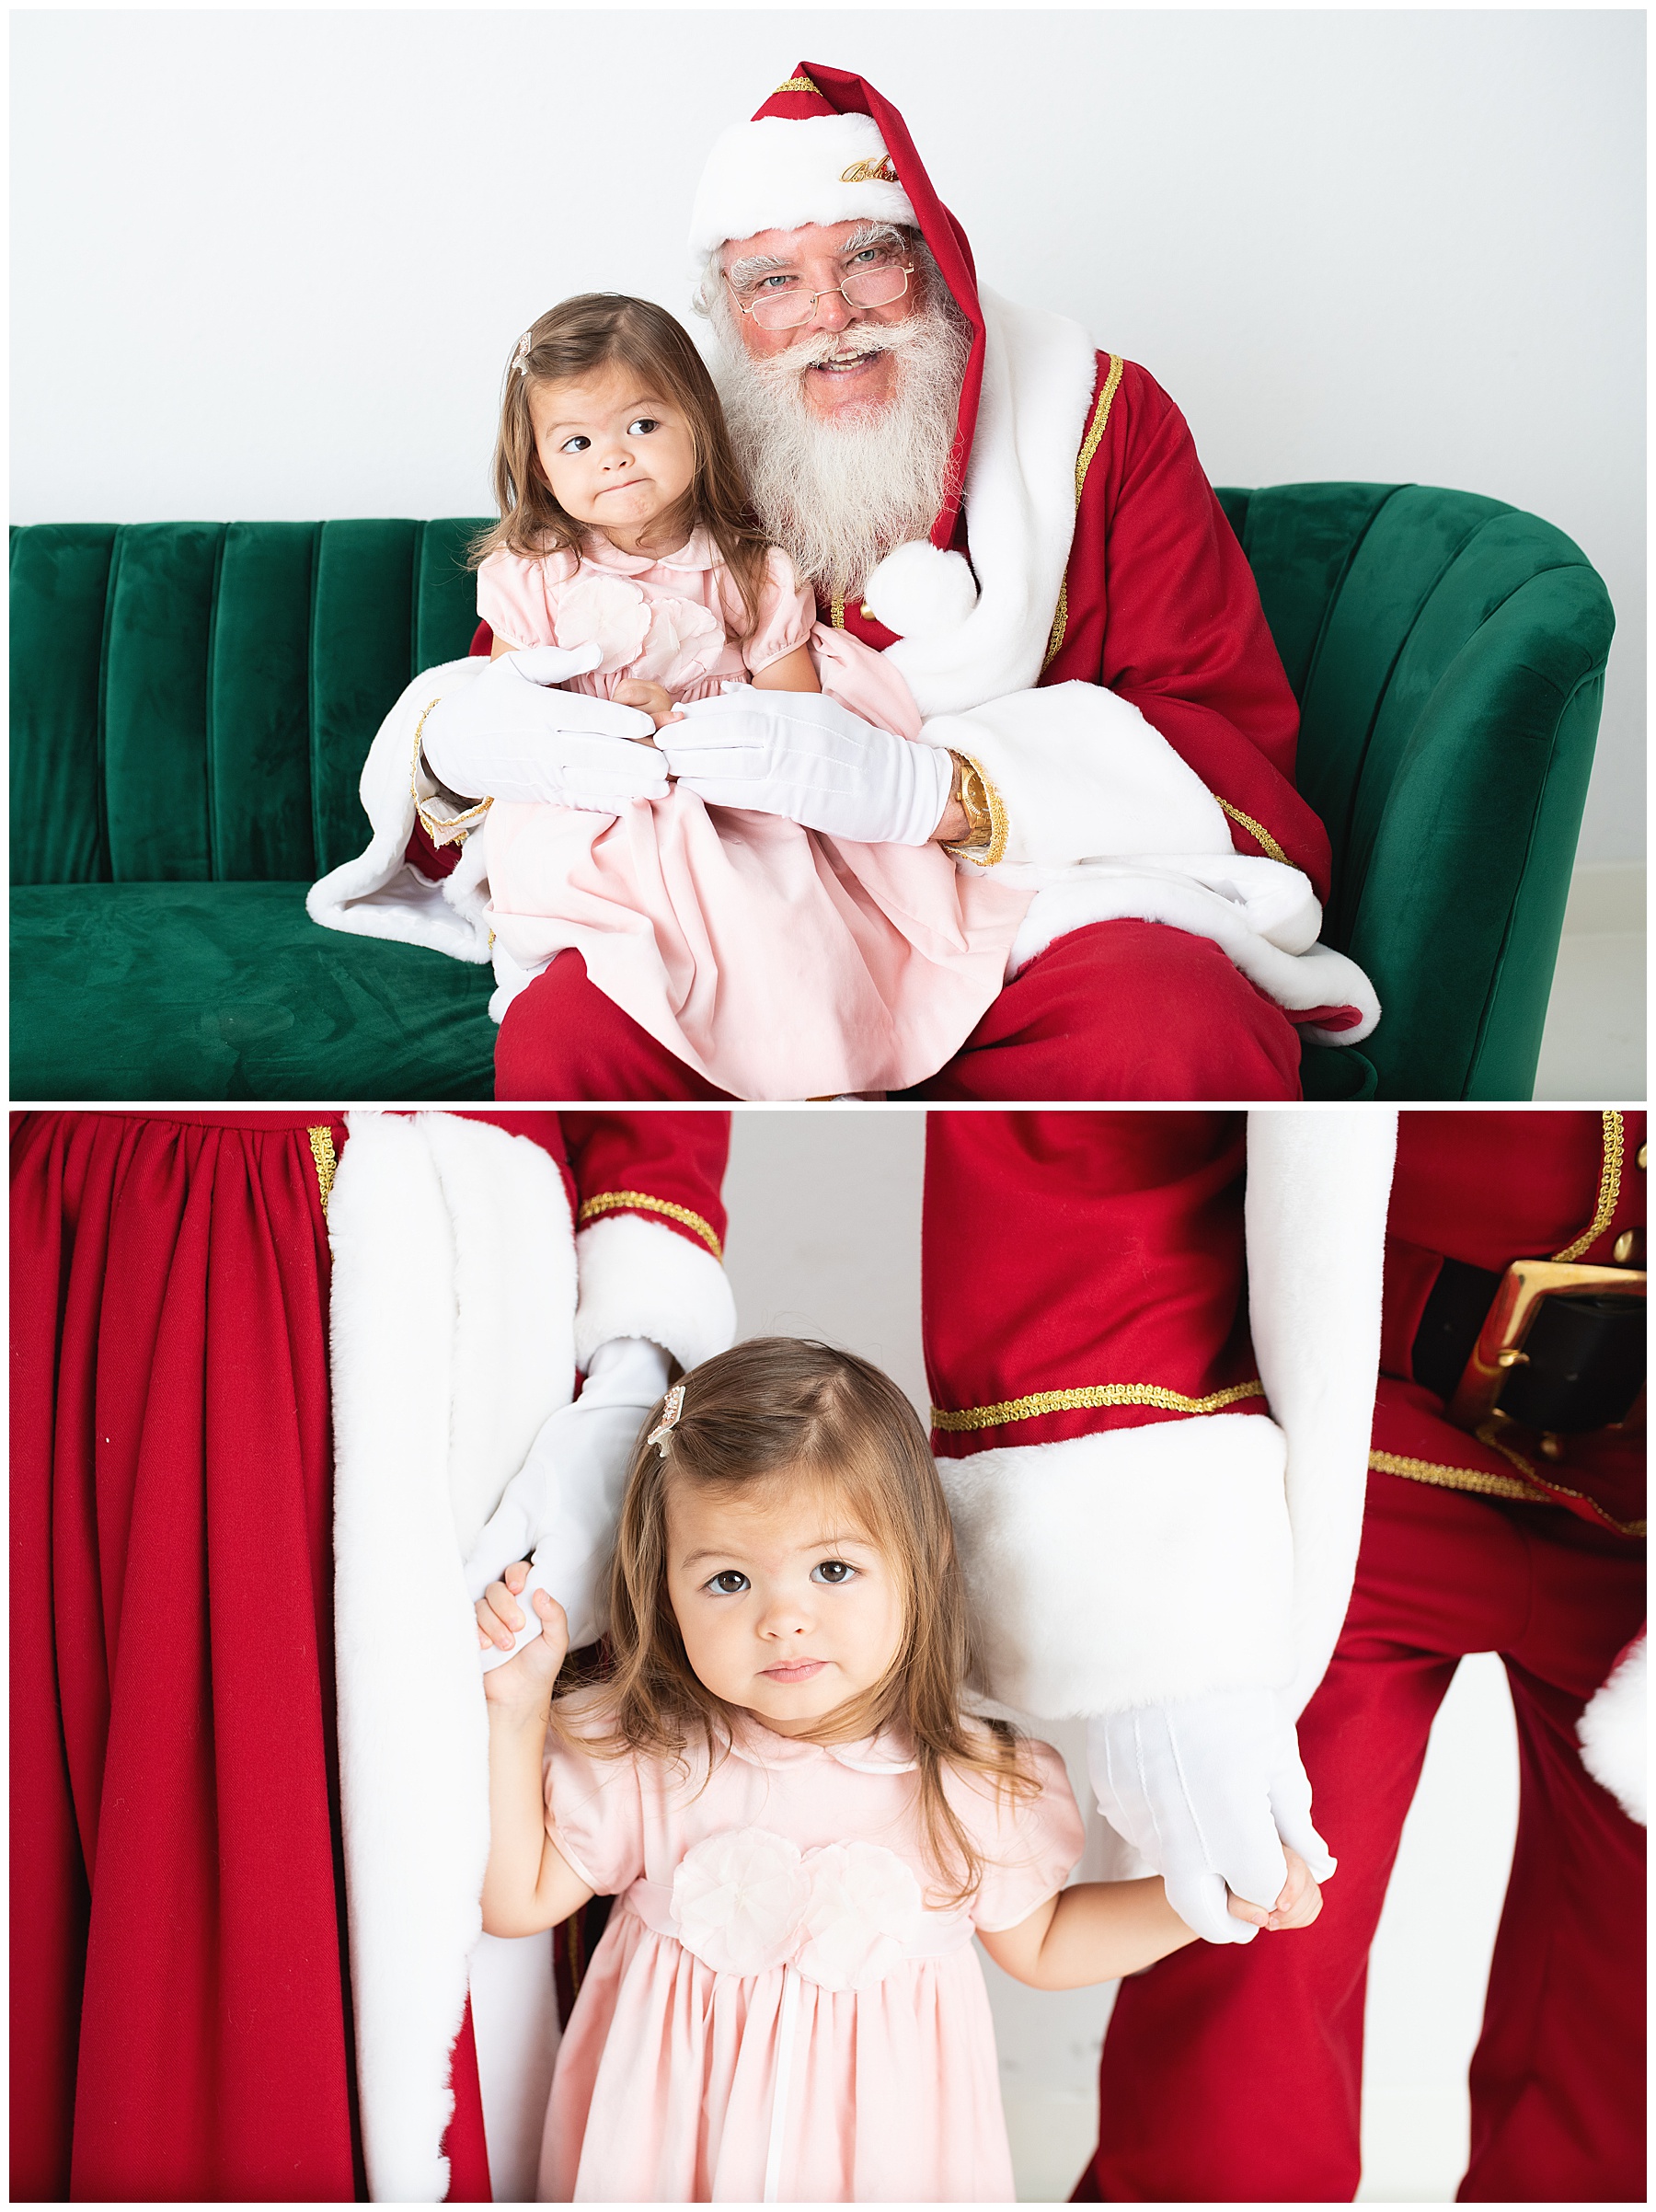 Little girl sitting with Santa and unsure about it